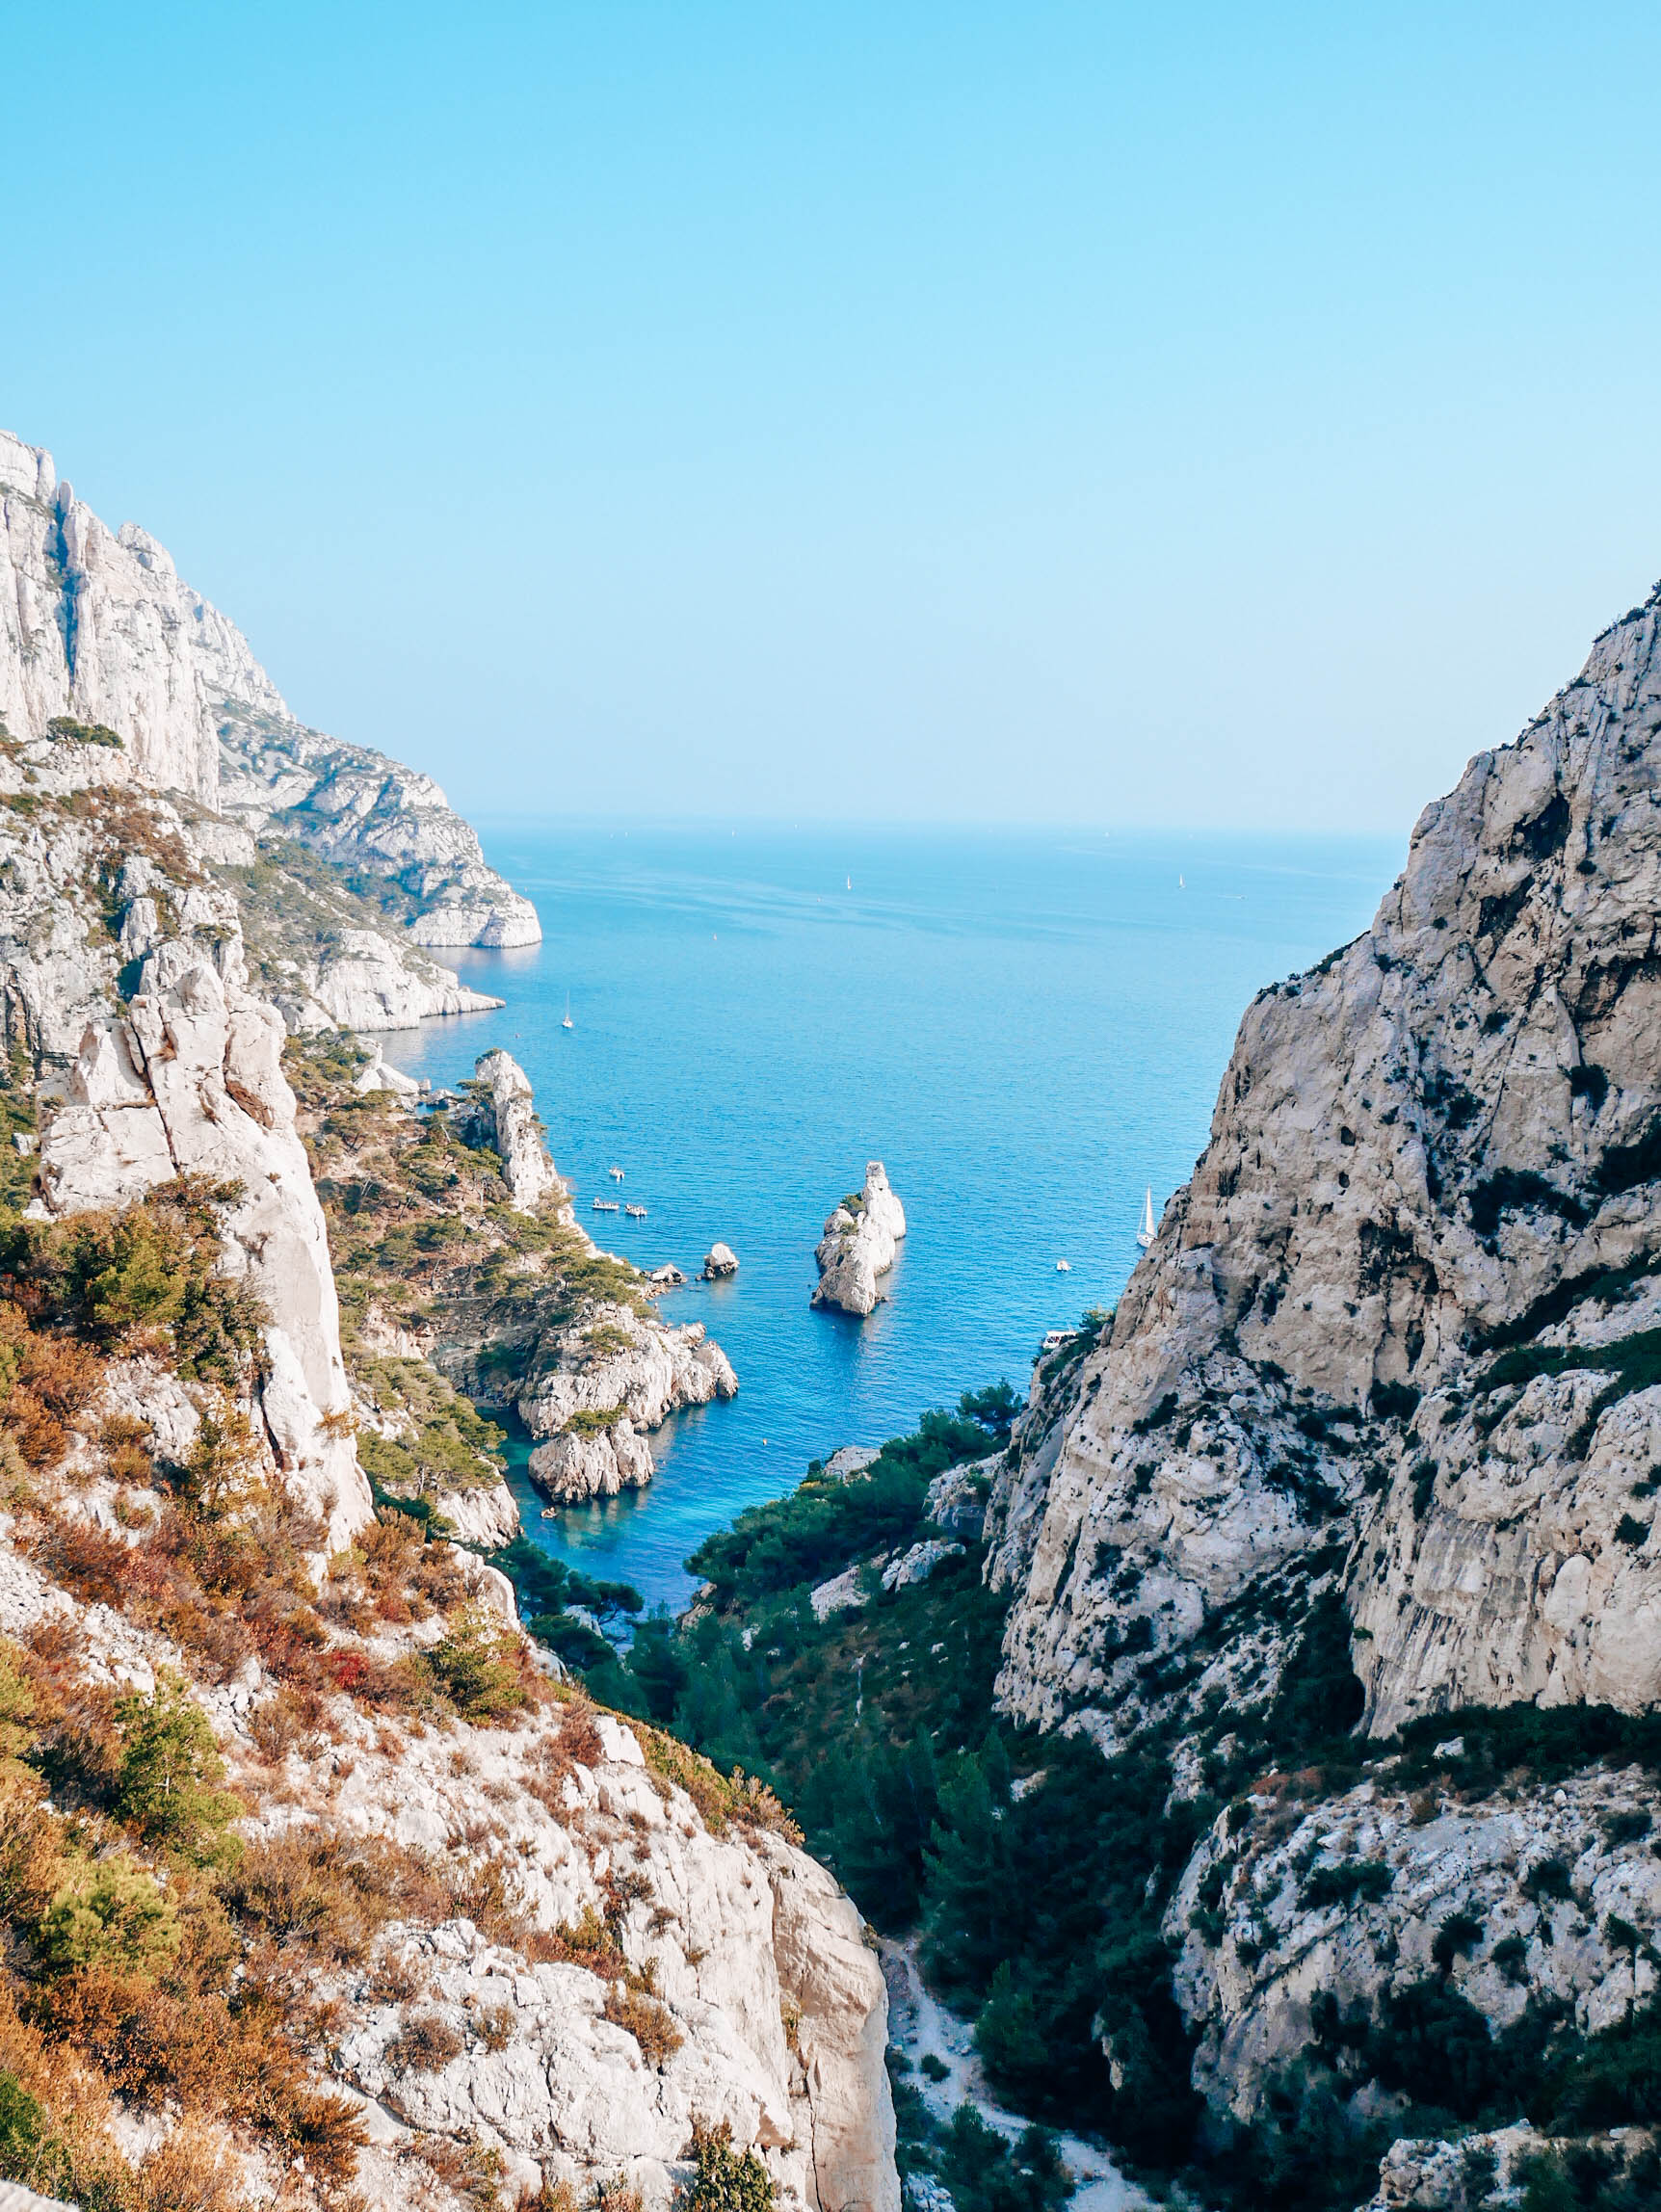 Halfway there - Calanques - France